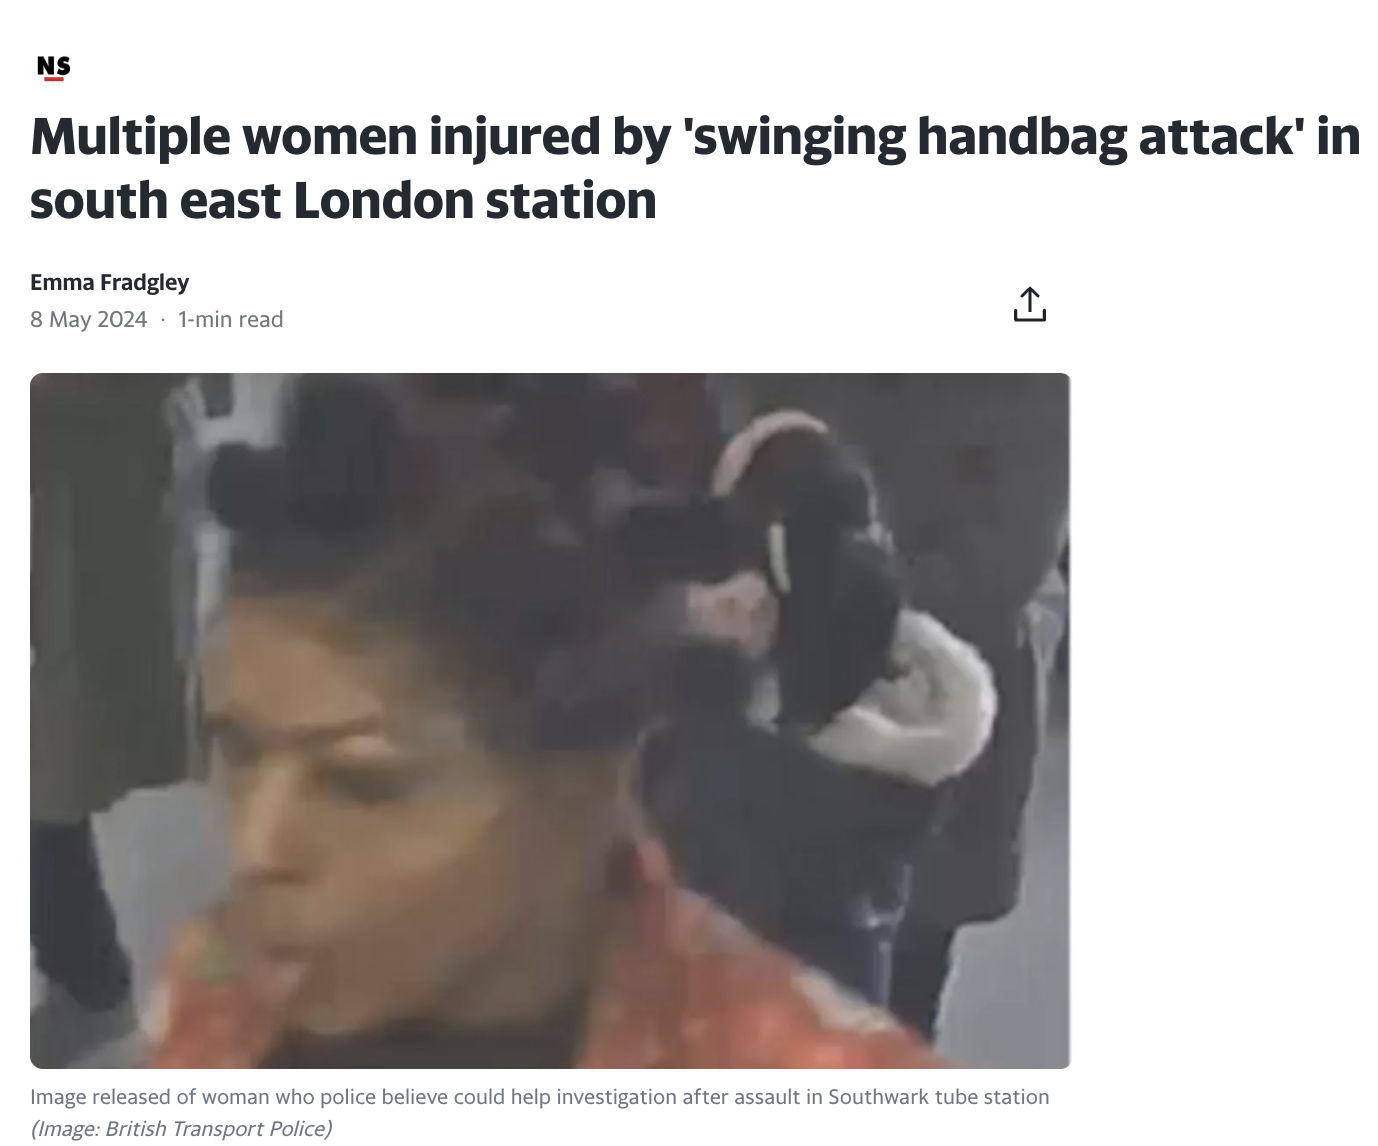 photo caption - Ns Multiple women injured by 'swinging handbag attack' in south east London station Emma Fradgley 1min read Image released of woman who police believe could help investigation after assault in Southwark tube station Image British Transport